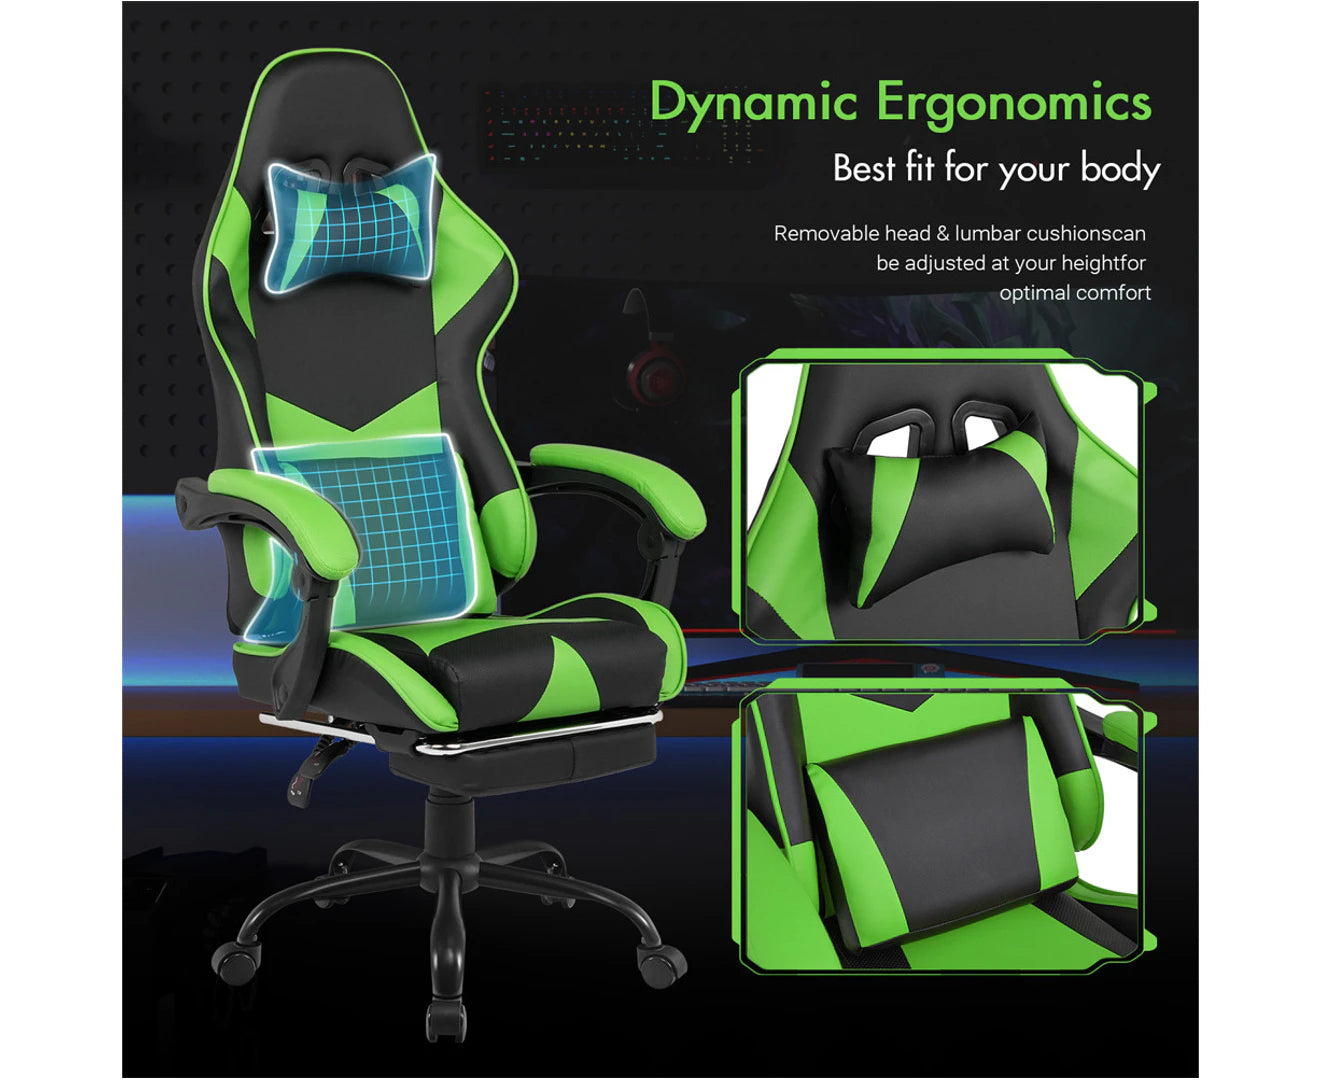 Computer Gaming Chair with Footrest High Back Ergonomic Office Chair PU Leather Gamer Chair with Lumbar Support Green